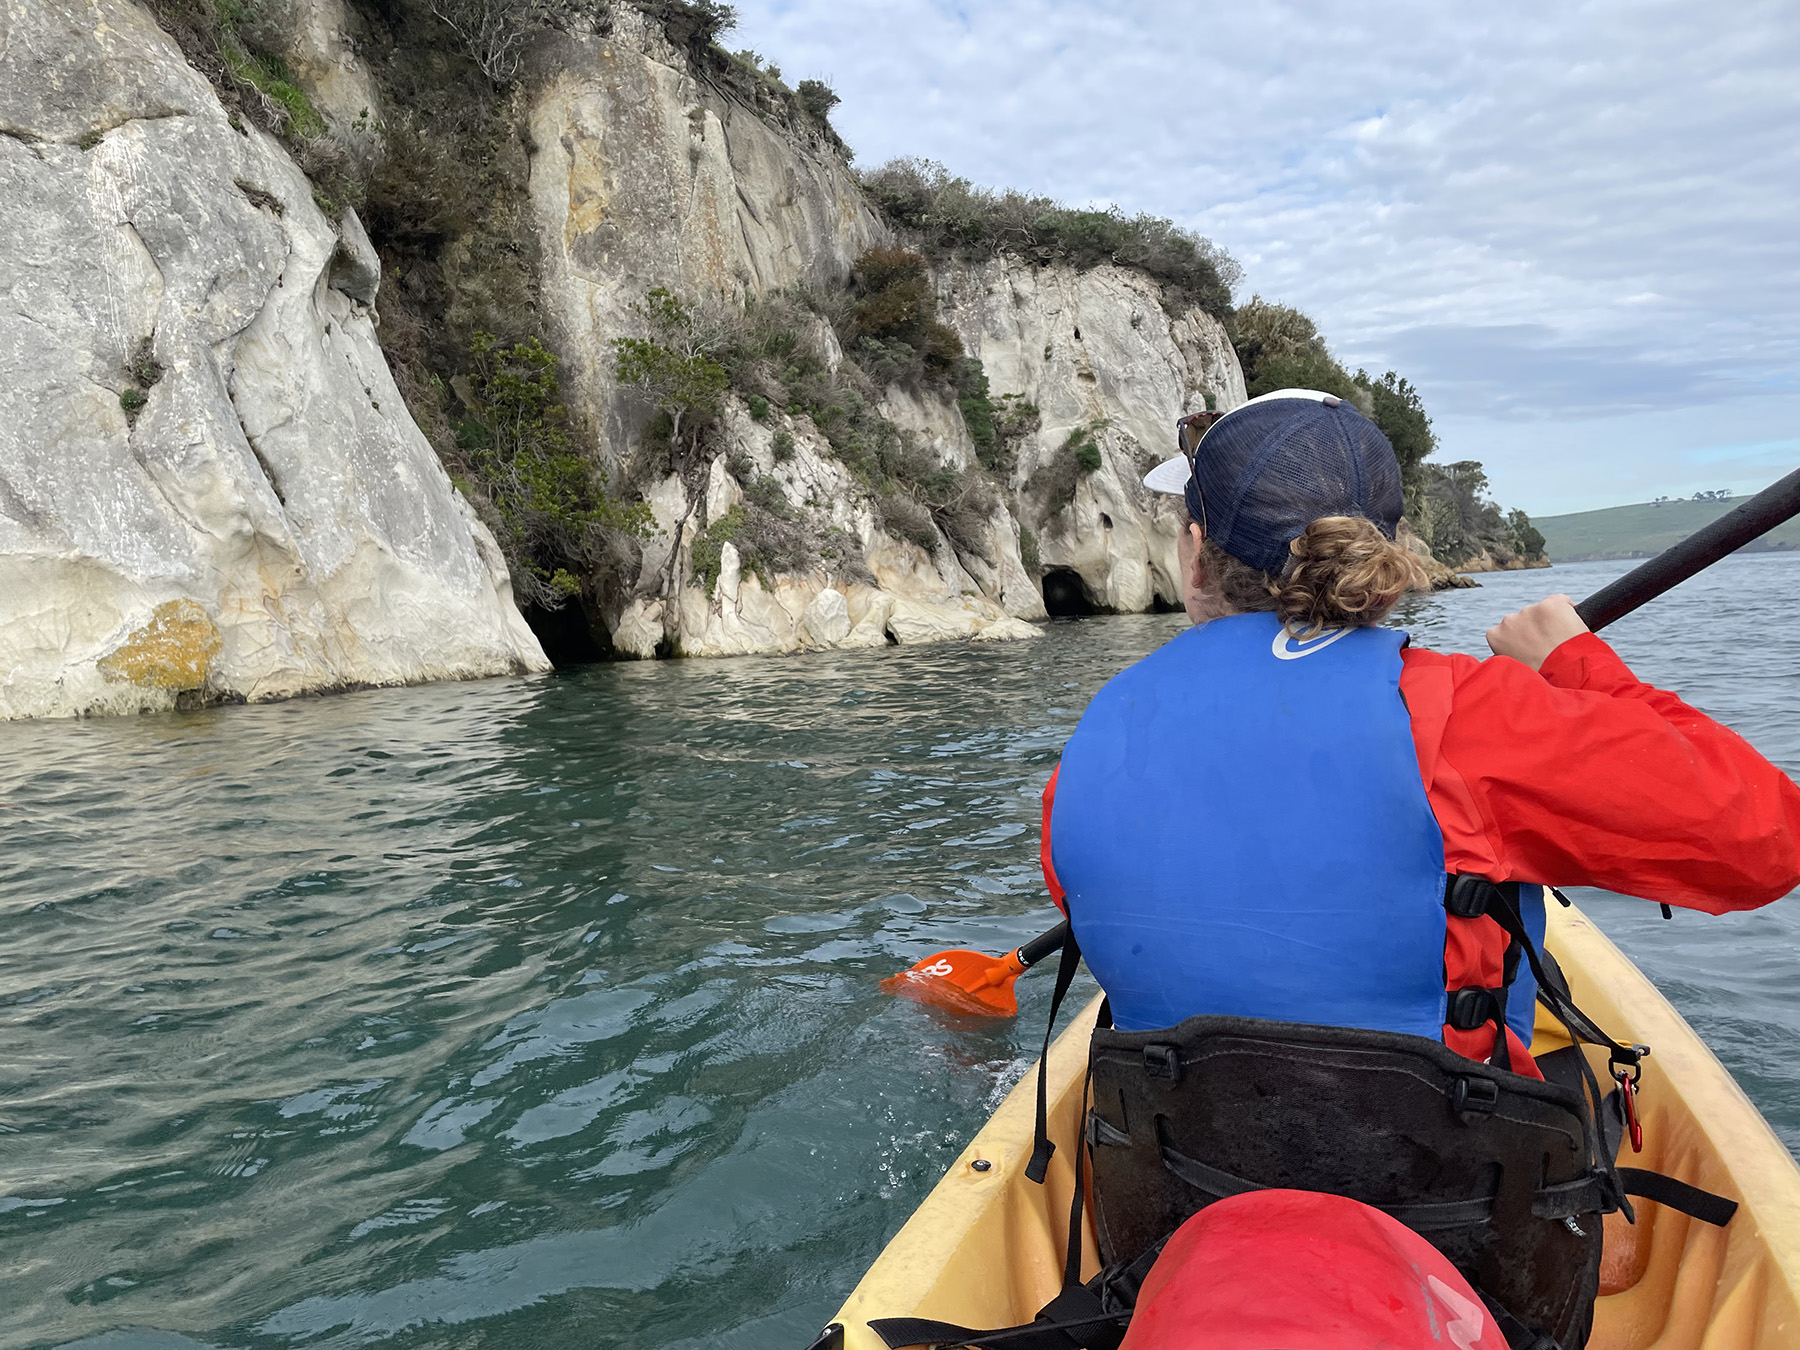 A woman in a red long sleeved shirt and blue life vest sits in the fron tof a kayak paddling towards a cliff in the distance.